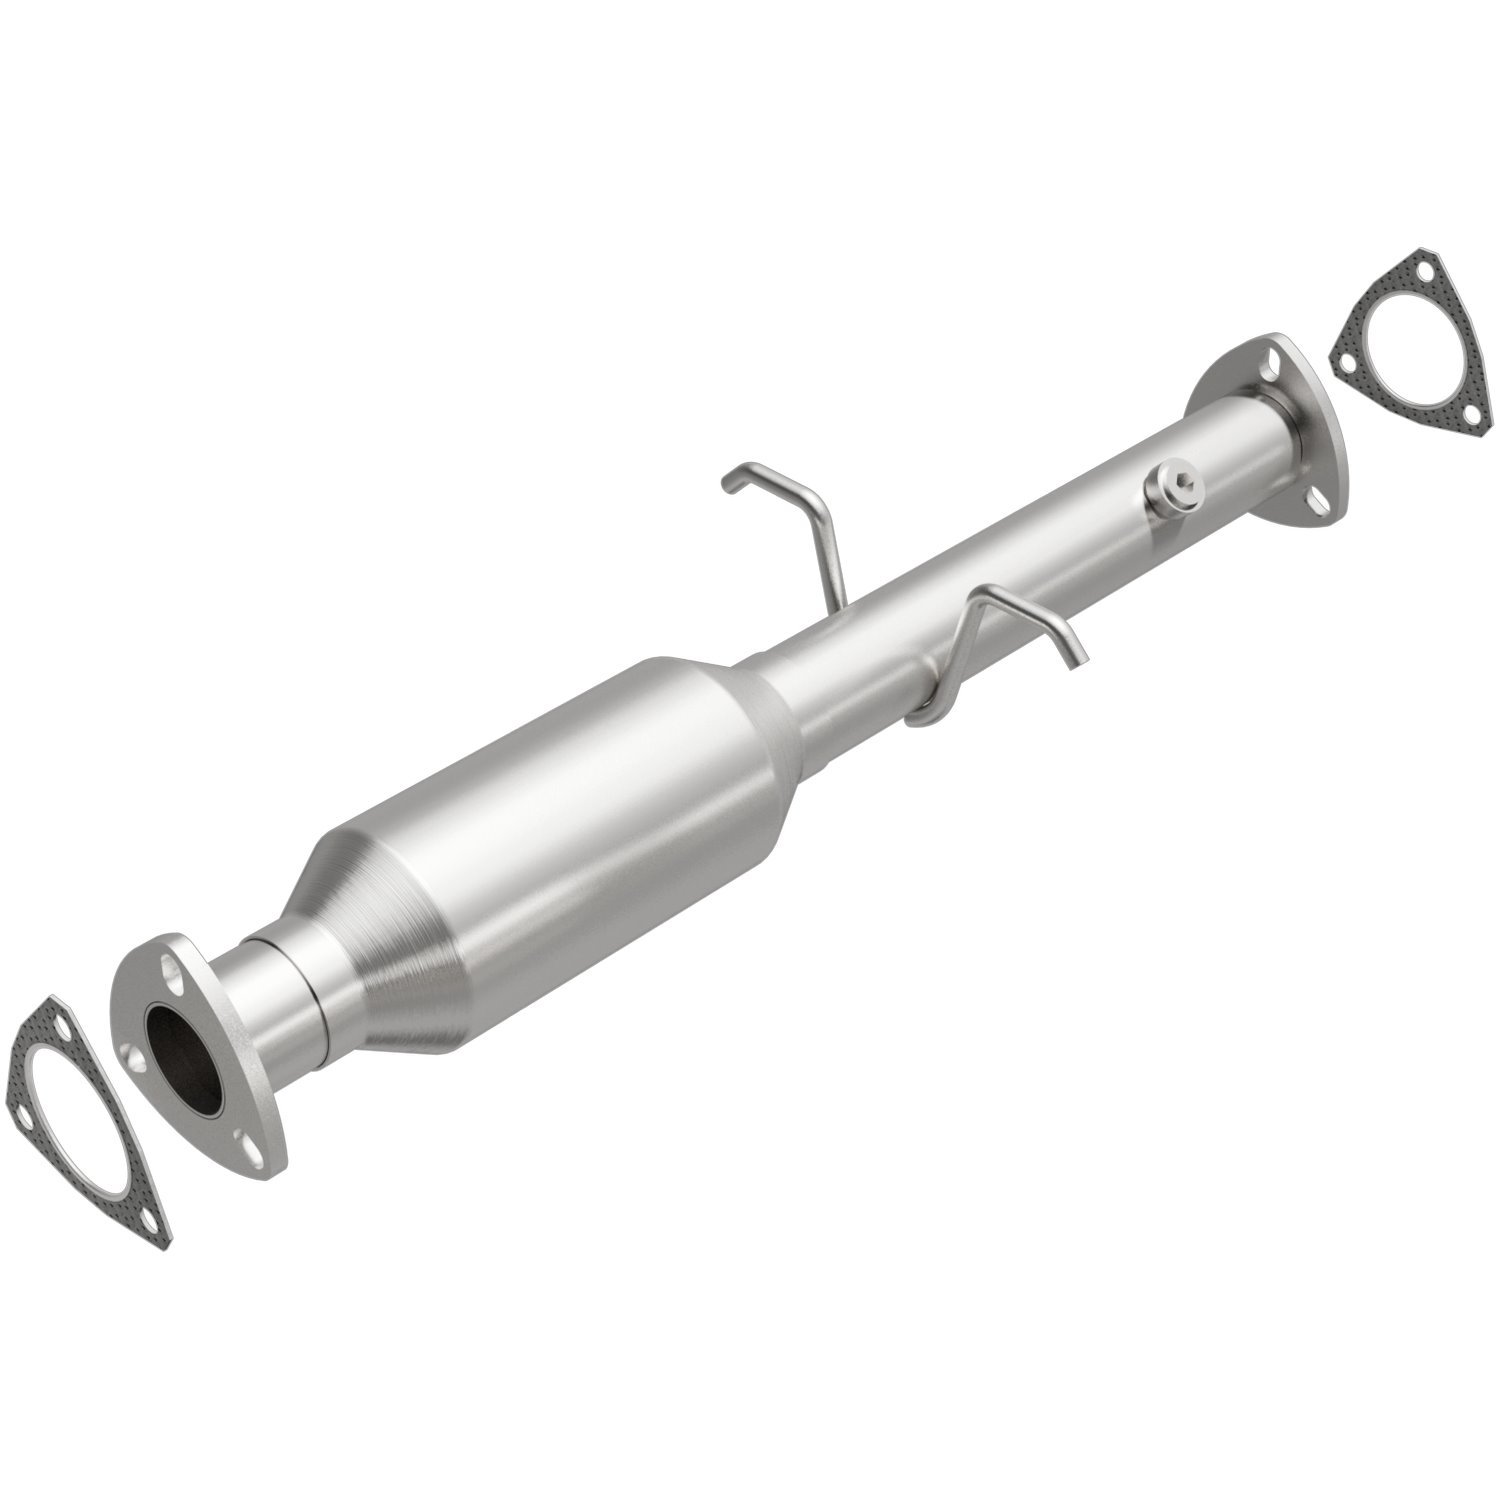 Direct-Fit Catalytic Converter 1996-2000 Chevy S10, GMC Sonoma,